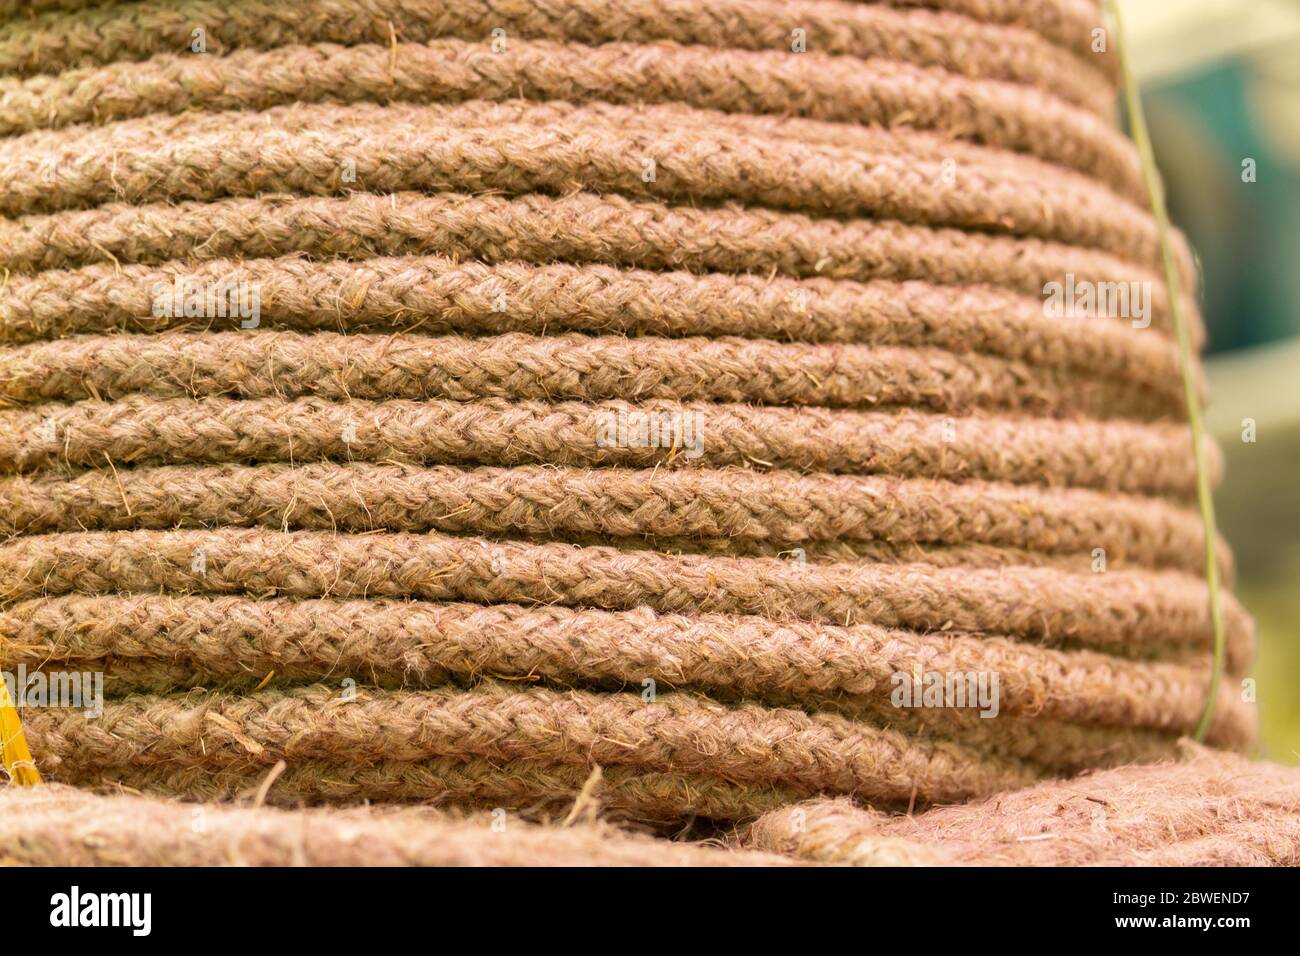 https://c8.alamy.com/comp/2BWEND7/natural-jute-rope-vegetable-fiber-woven-into-a-thick-thread-close-up-textured-effect-natural-plant-material-hemp-or-linen-rope-backdrop-texture-ba-2BWEND7.jpg